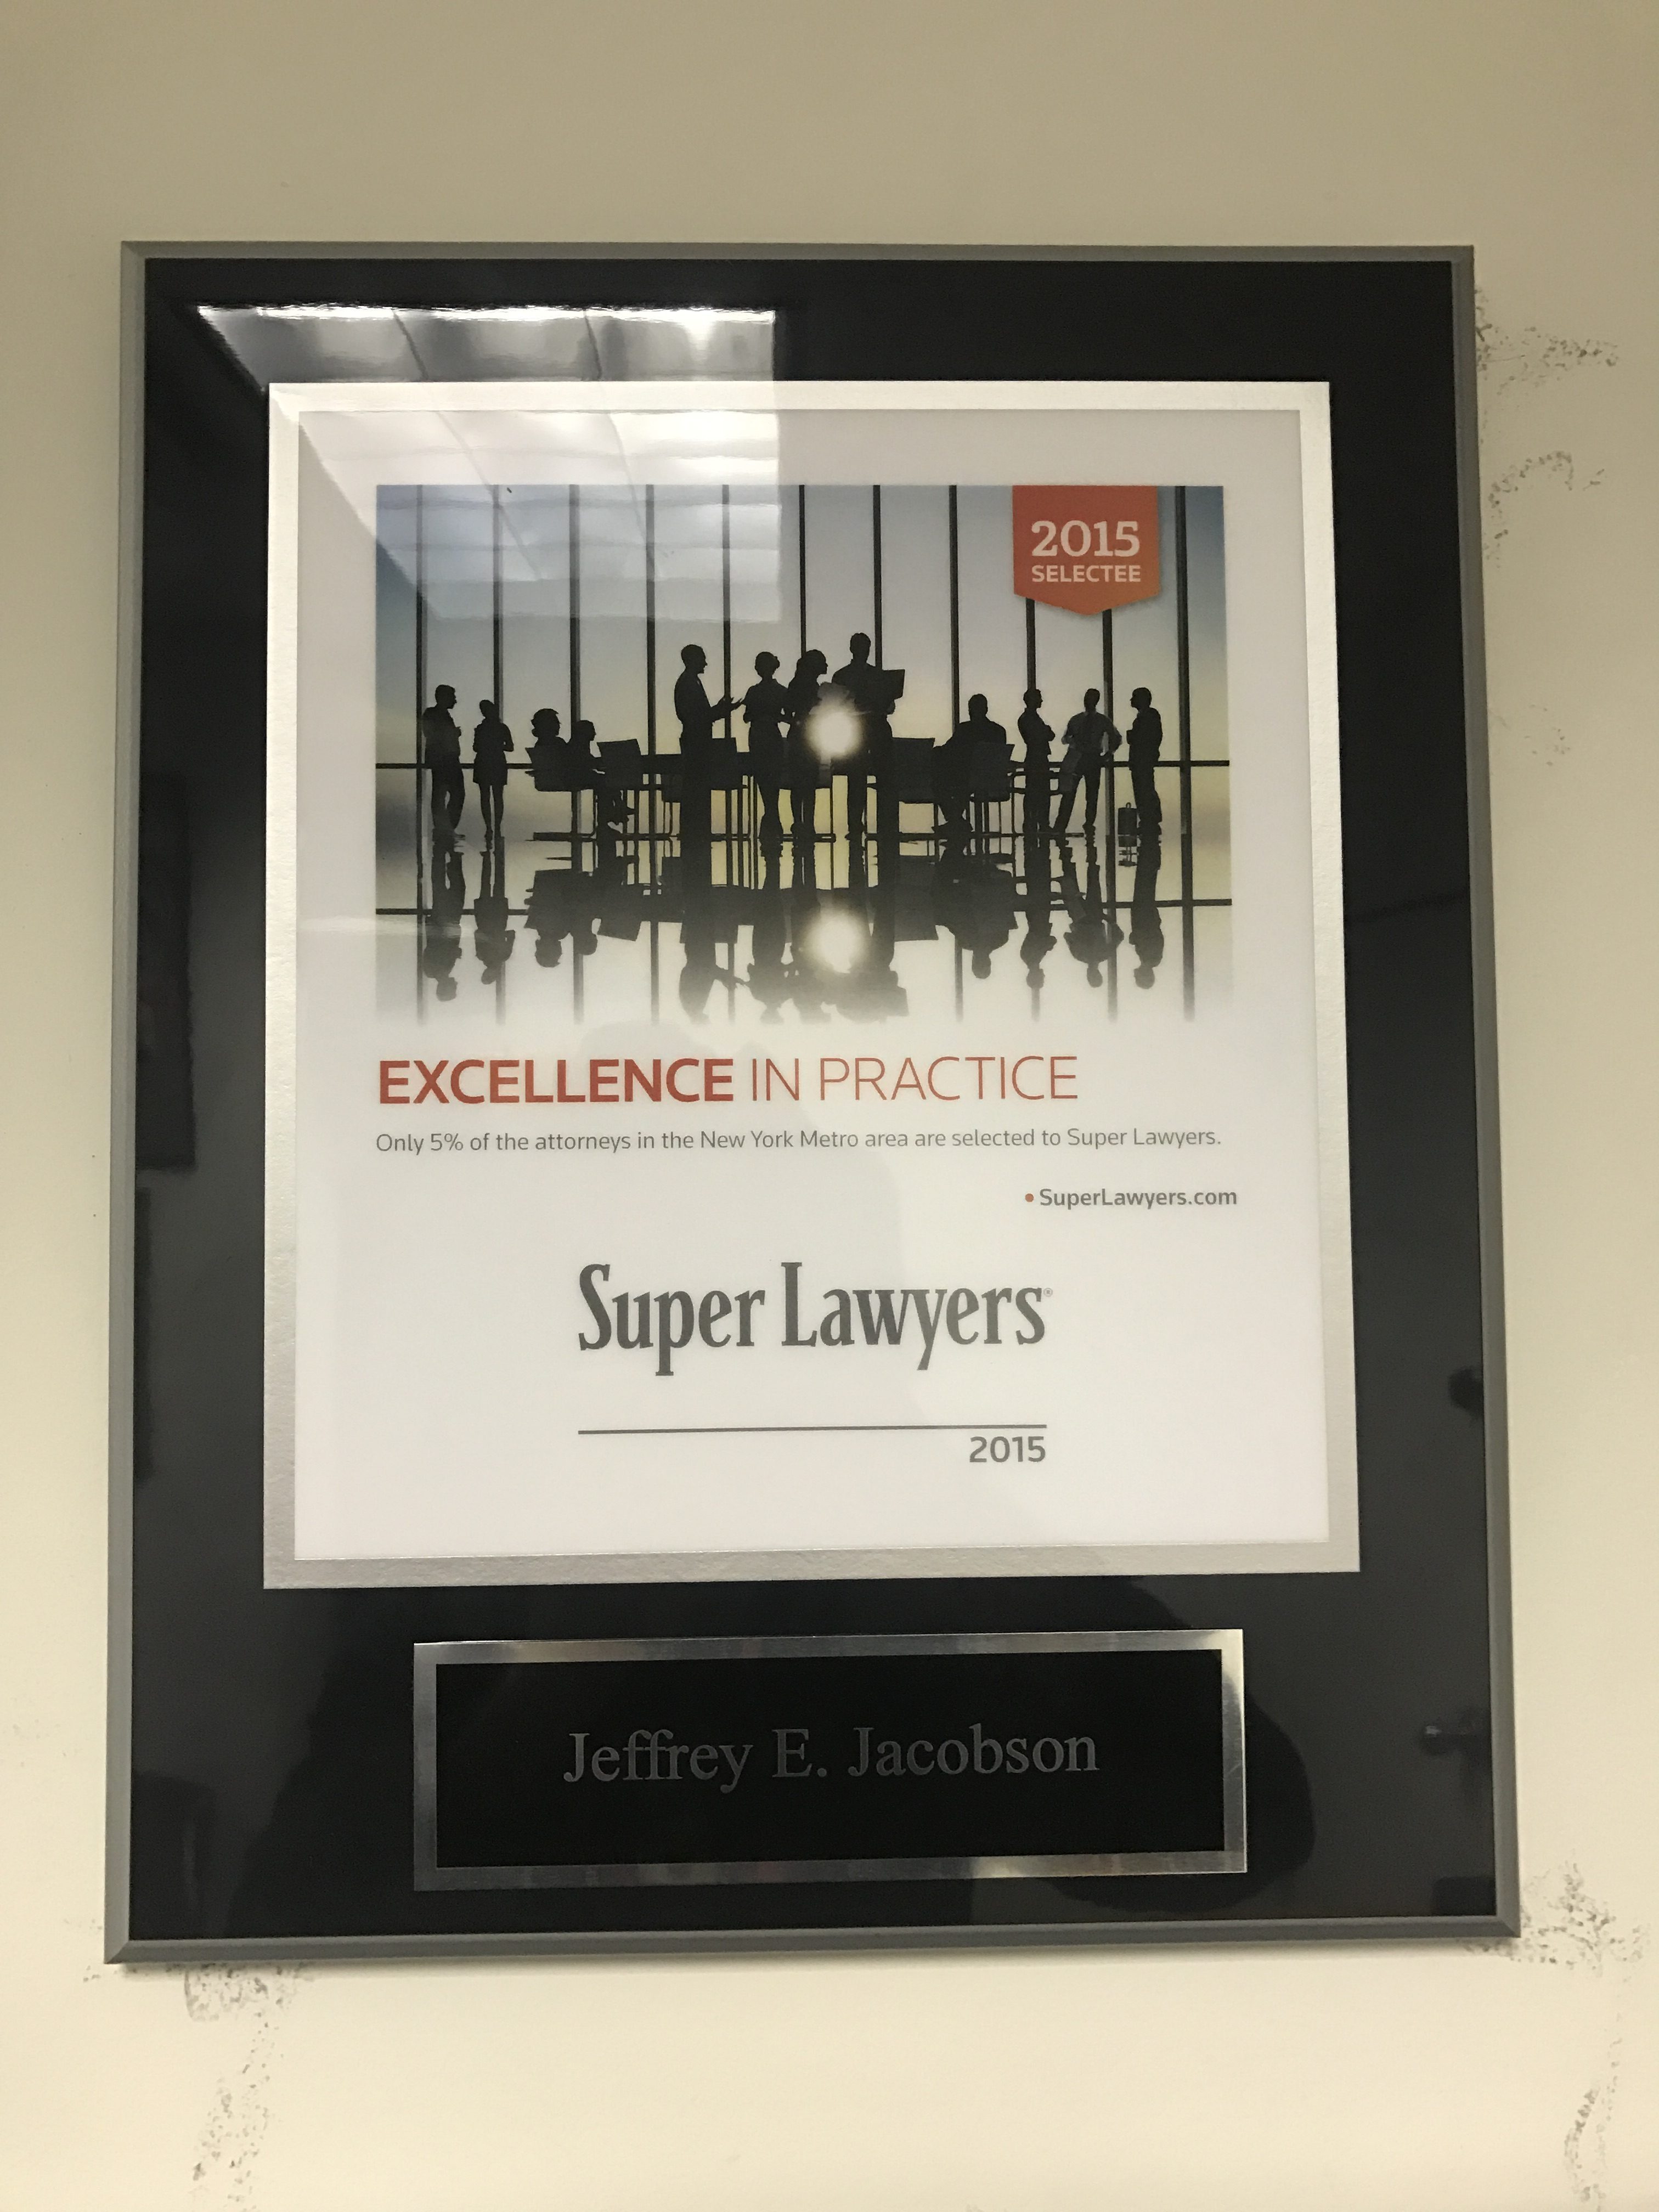 Jeffrey E. Jacobson selected as SuperLawyer